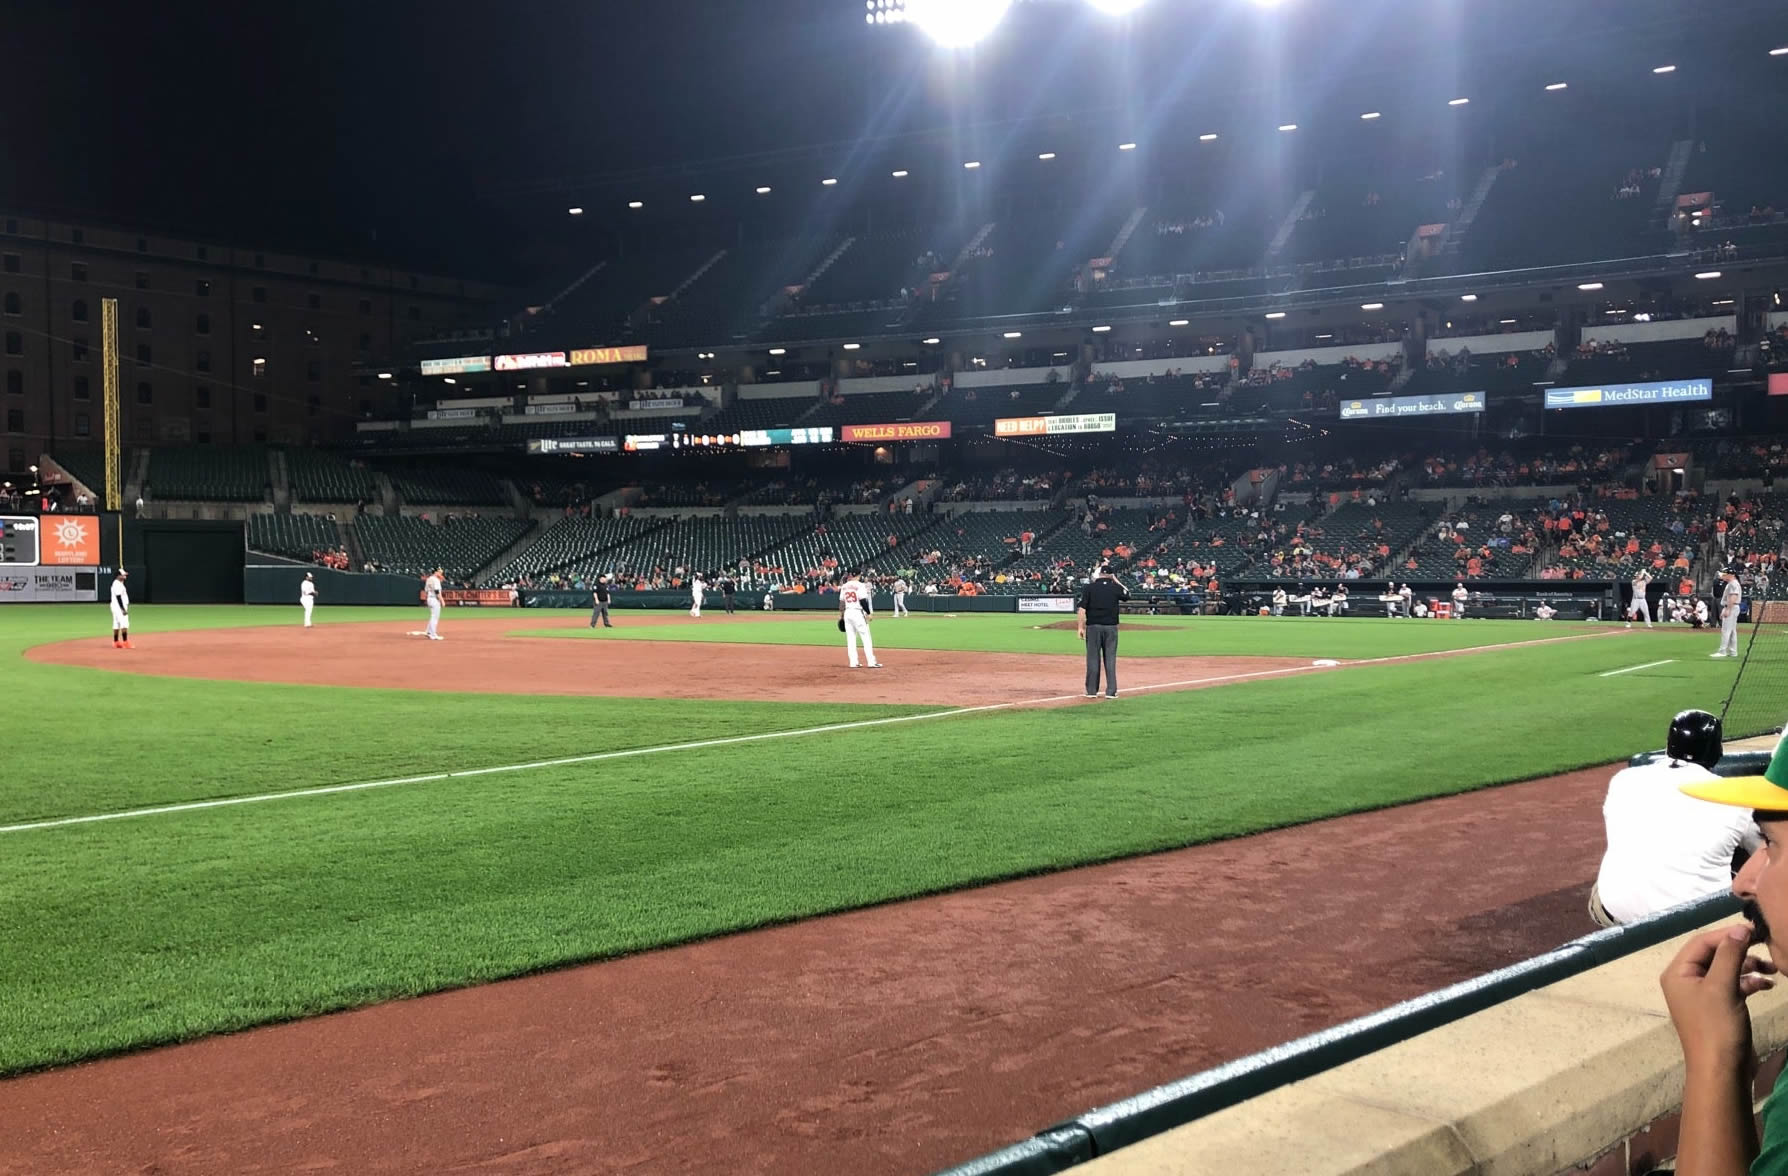 section 62, row 1 seat view  - oriole park